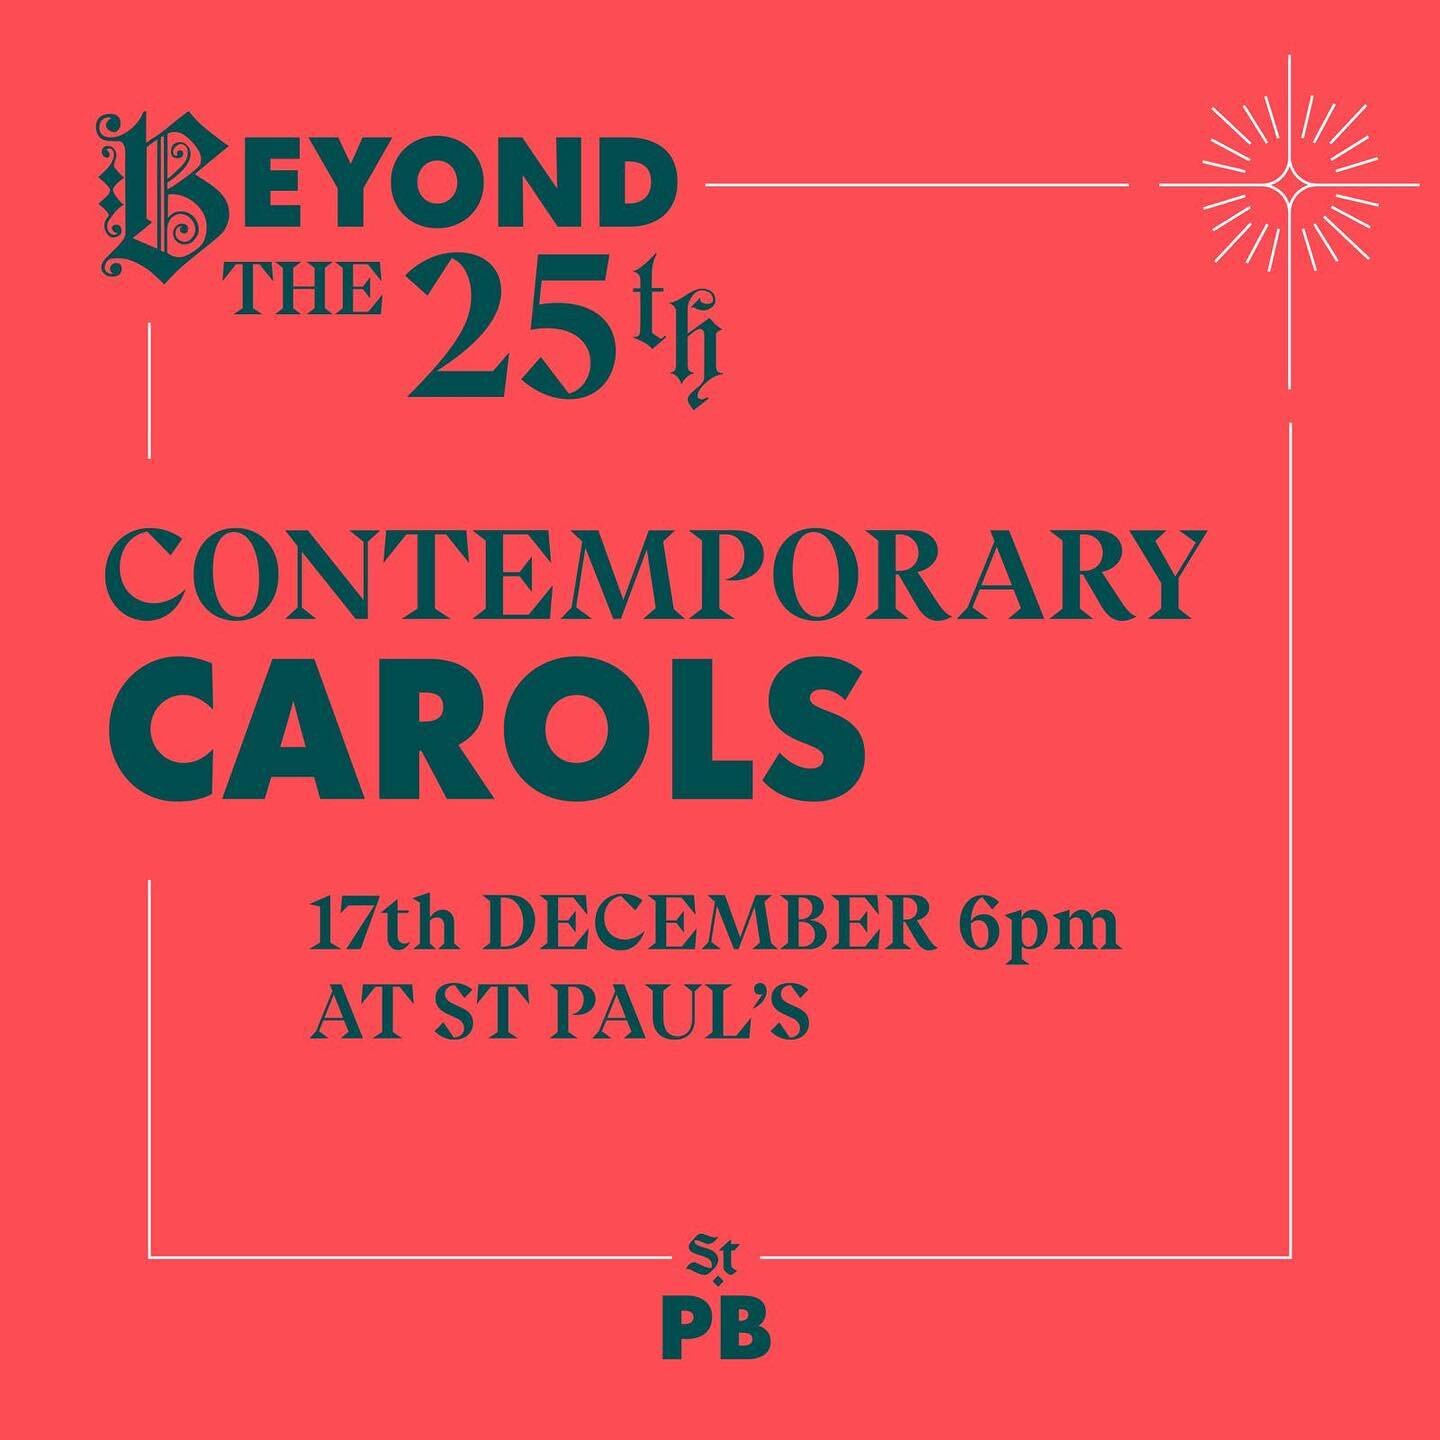 We are counting down the days! 23 days to go! The team are working hard behind the scenes; rehearsals are well underway for a creative and fun Contemporary Carols. We would love to see you, your family and your friends. Come early to get your seat. W